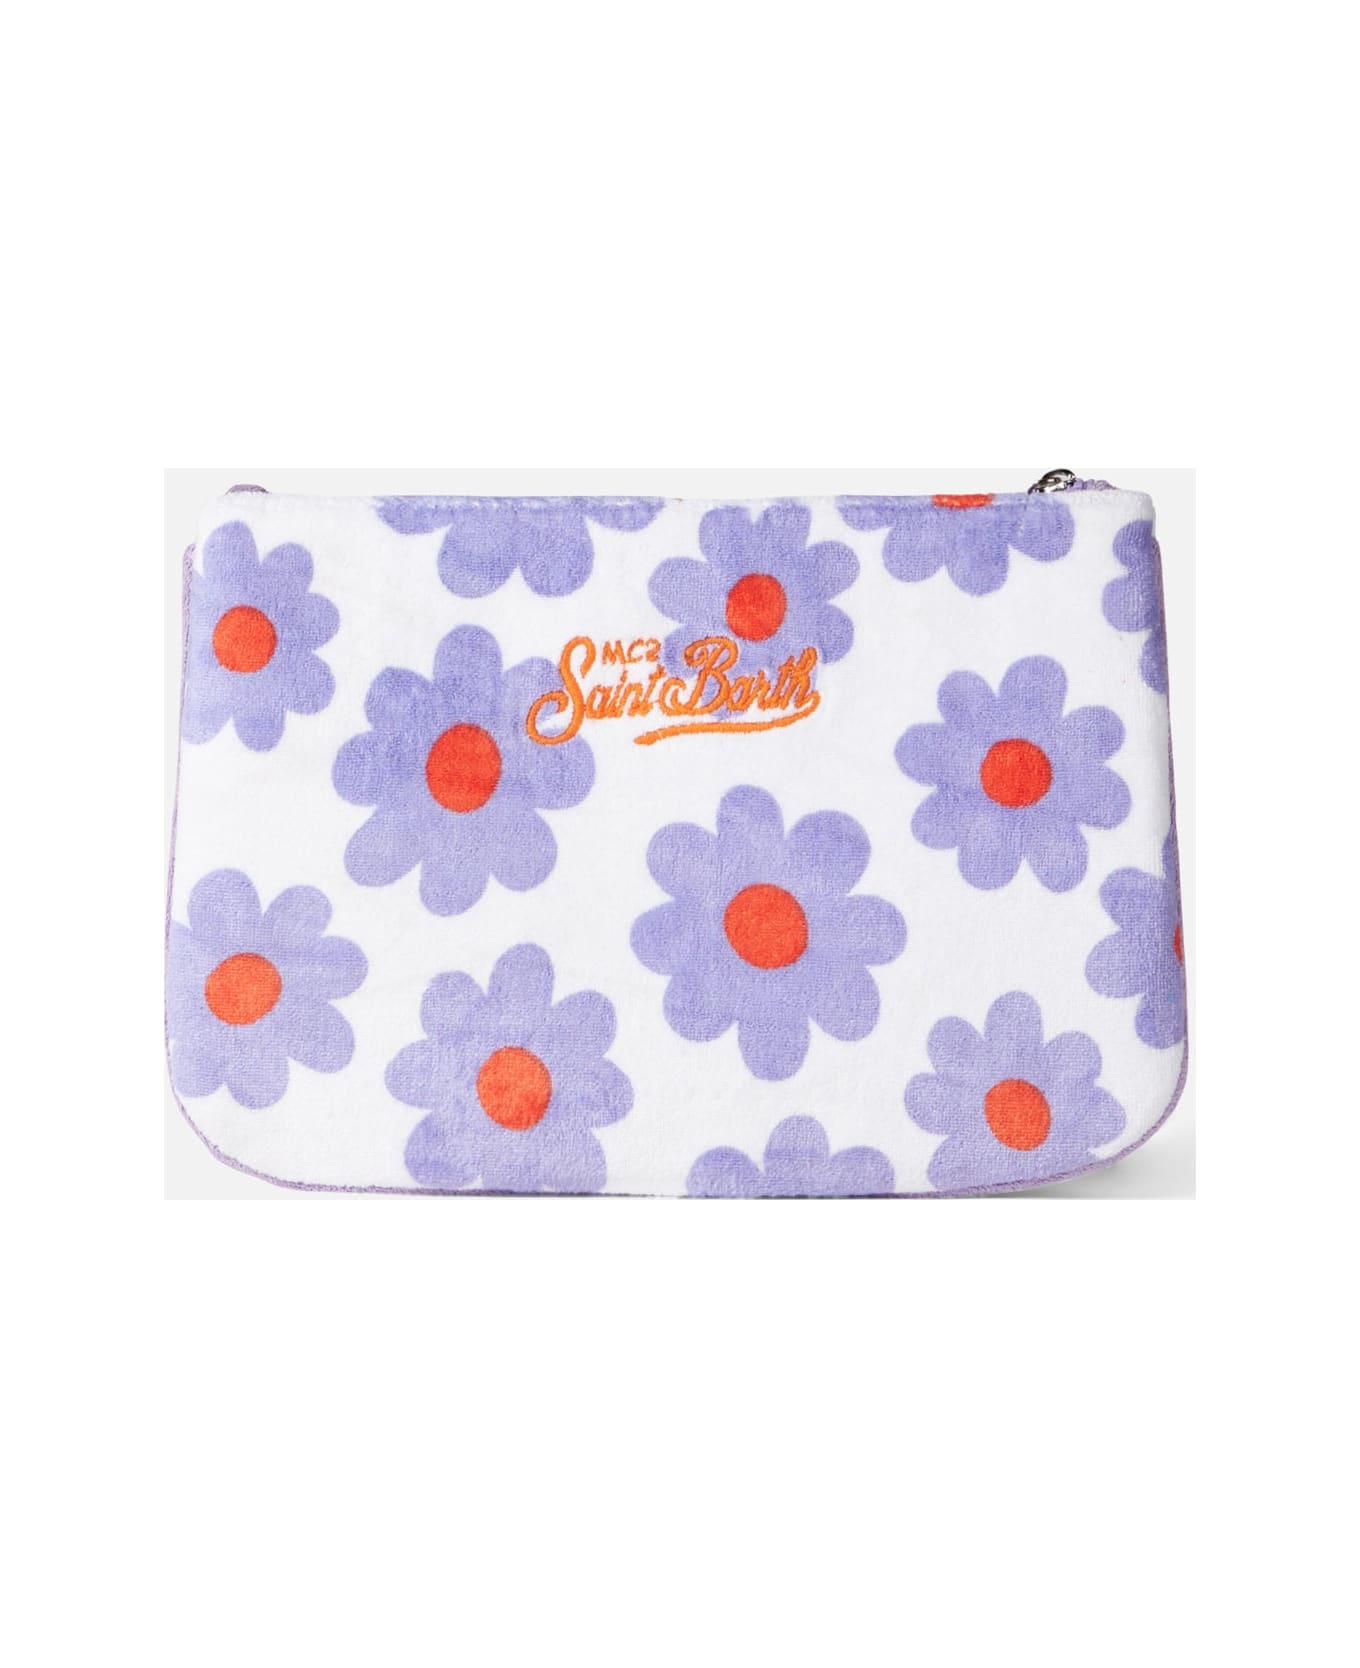 MC2 Saint Barth Parisienne Terry Pouch Bag With Violet And Orange Daisy Print - PINK